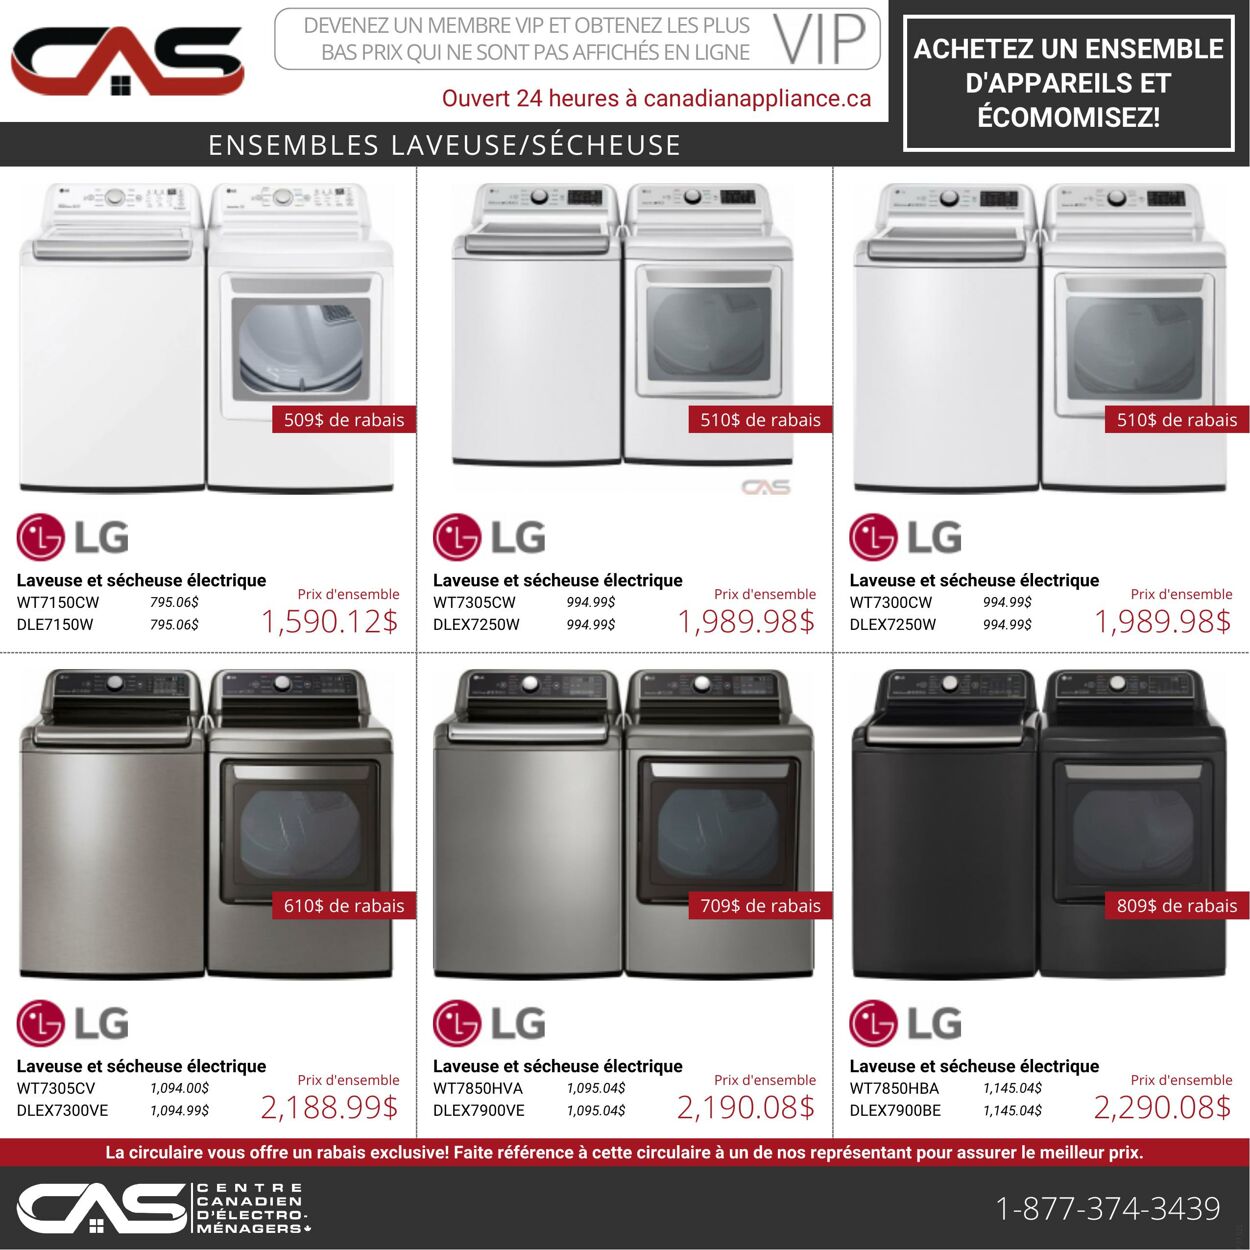 Flyer Canadian Appliance Source 31.12.2021 - 06.01.2022